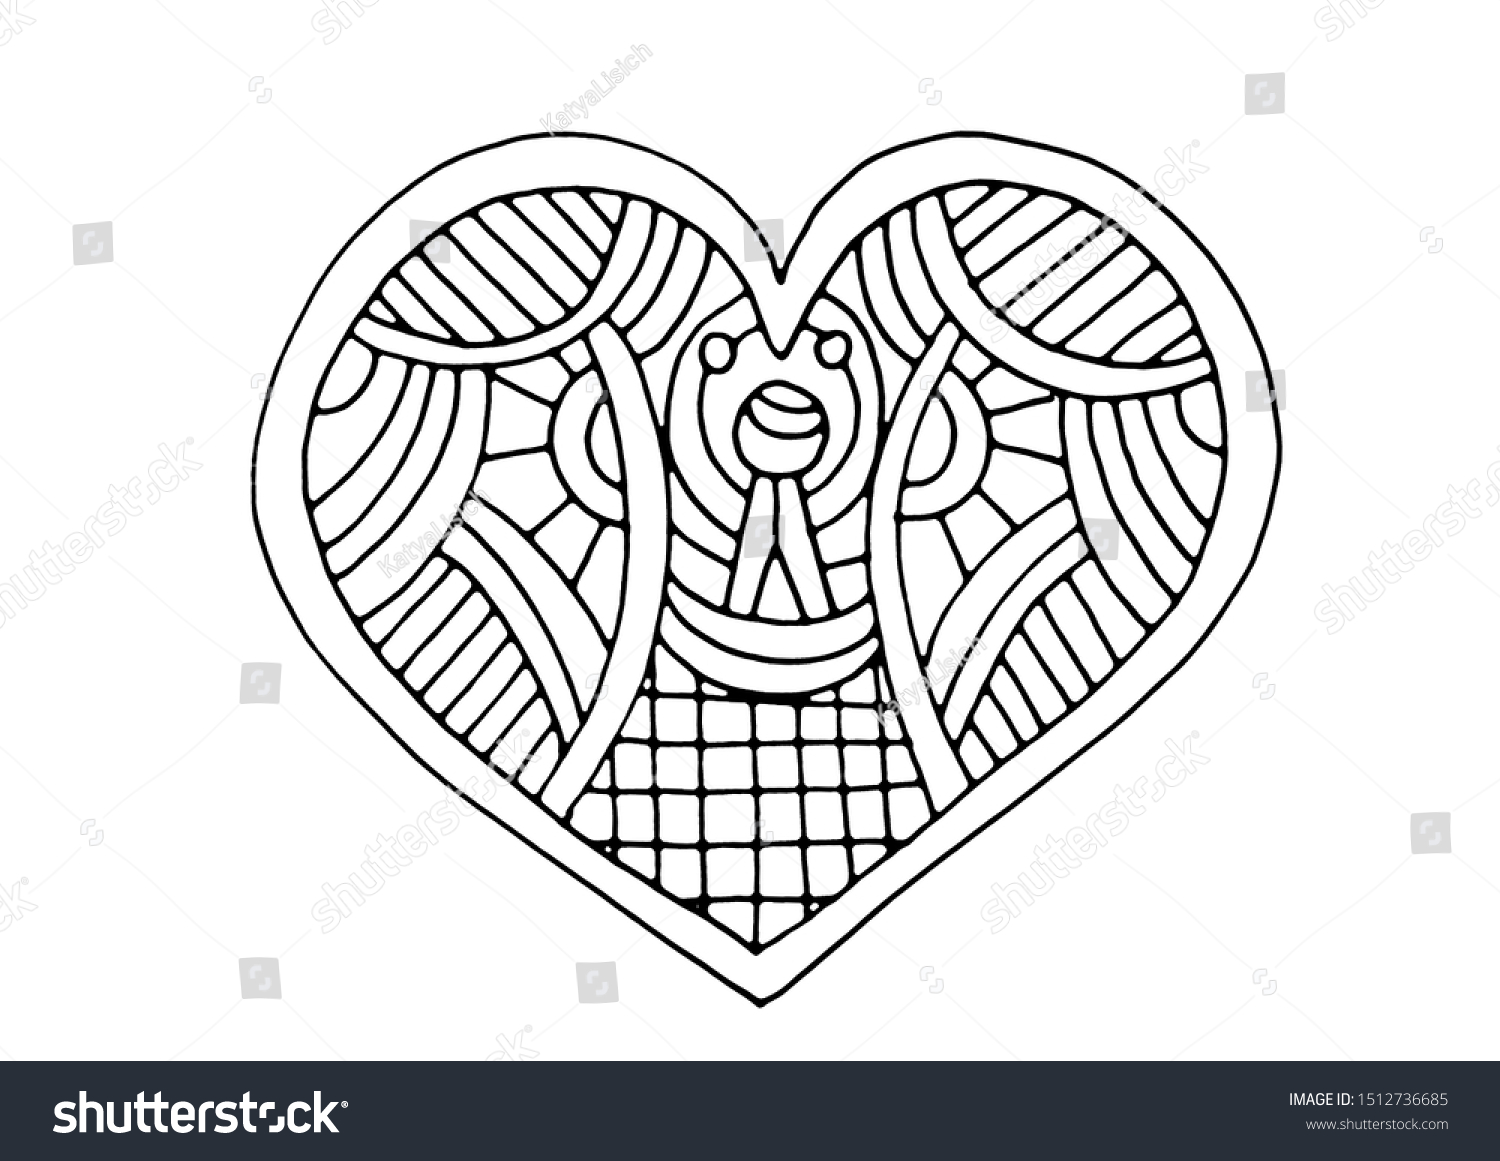 Heart stained glass patterns coloring page stock illustration